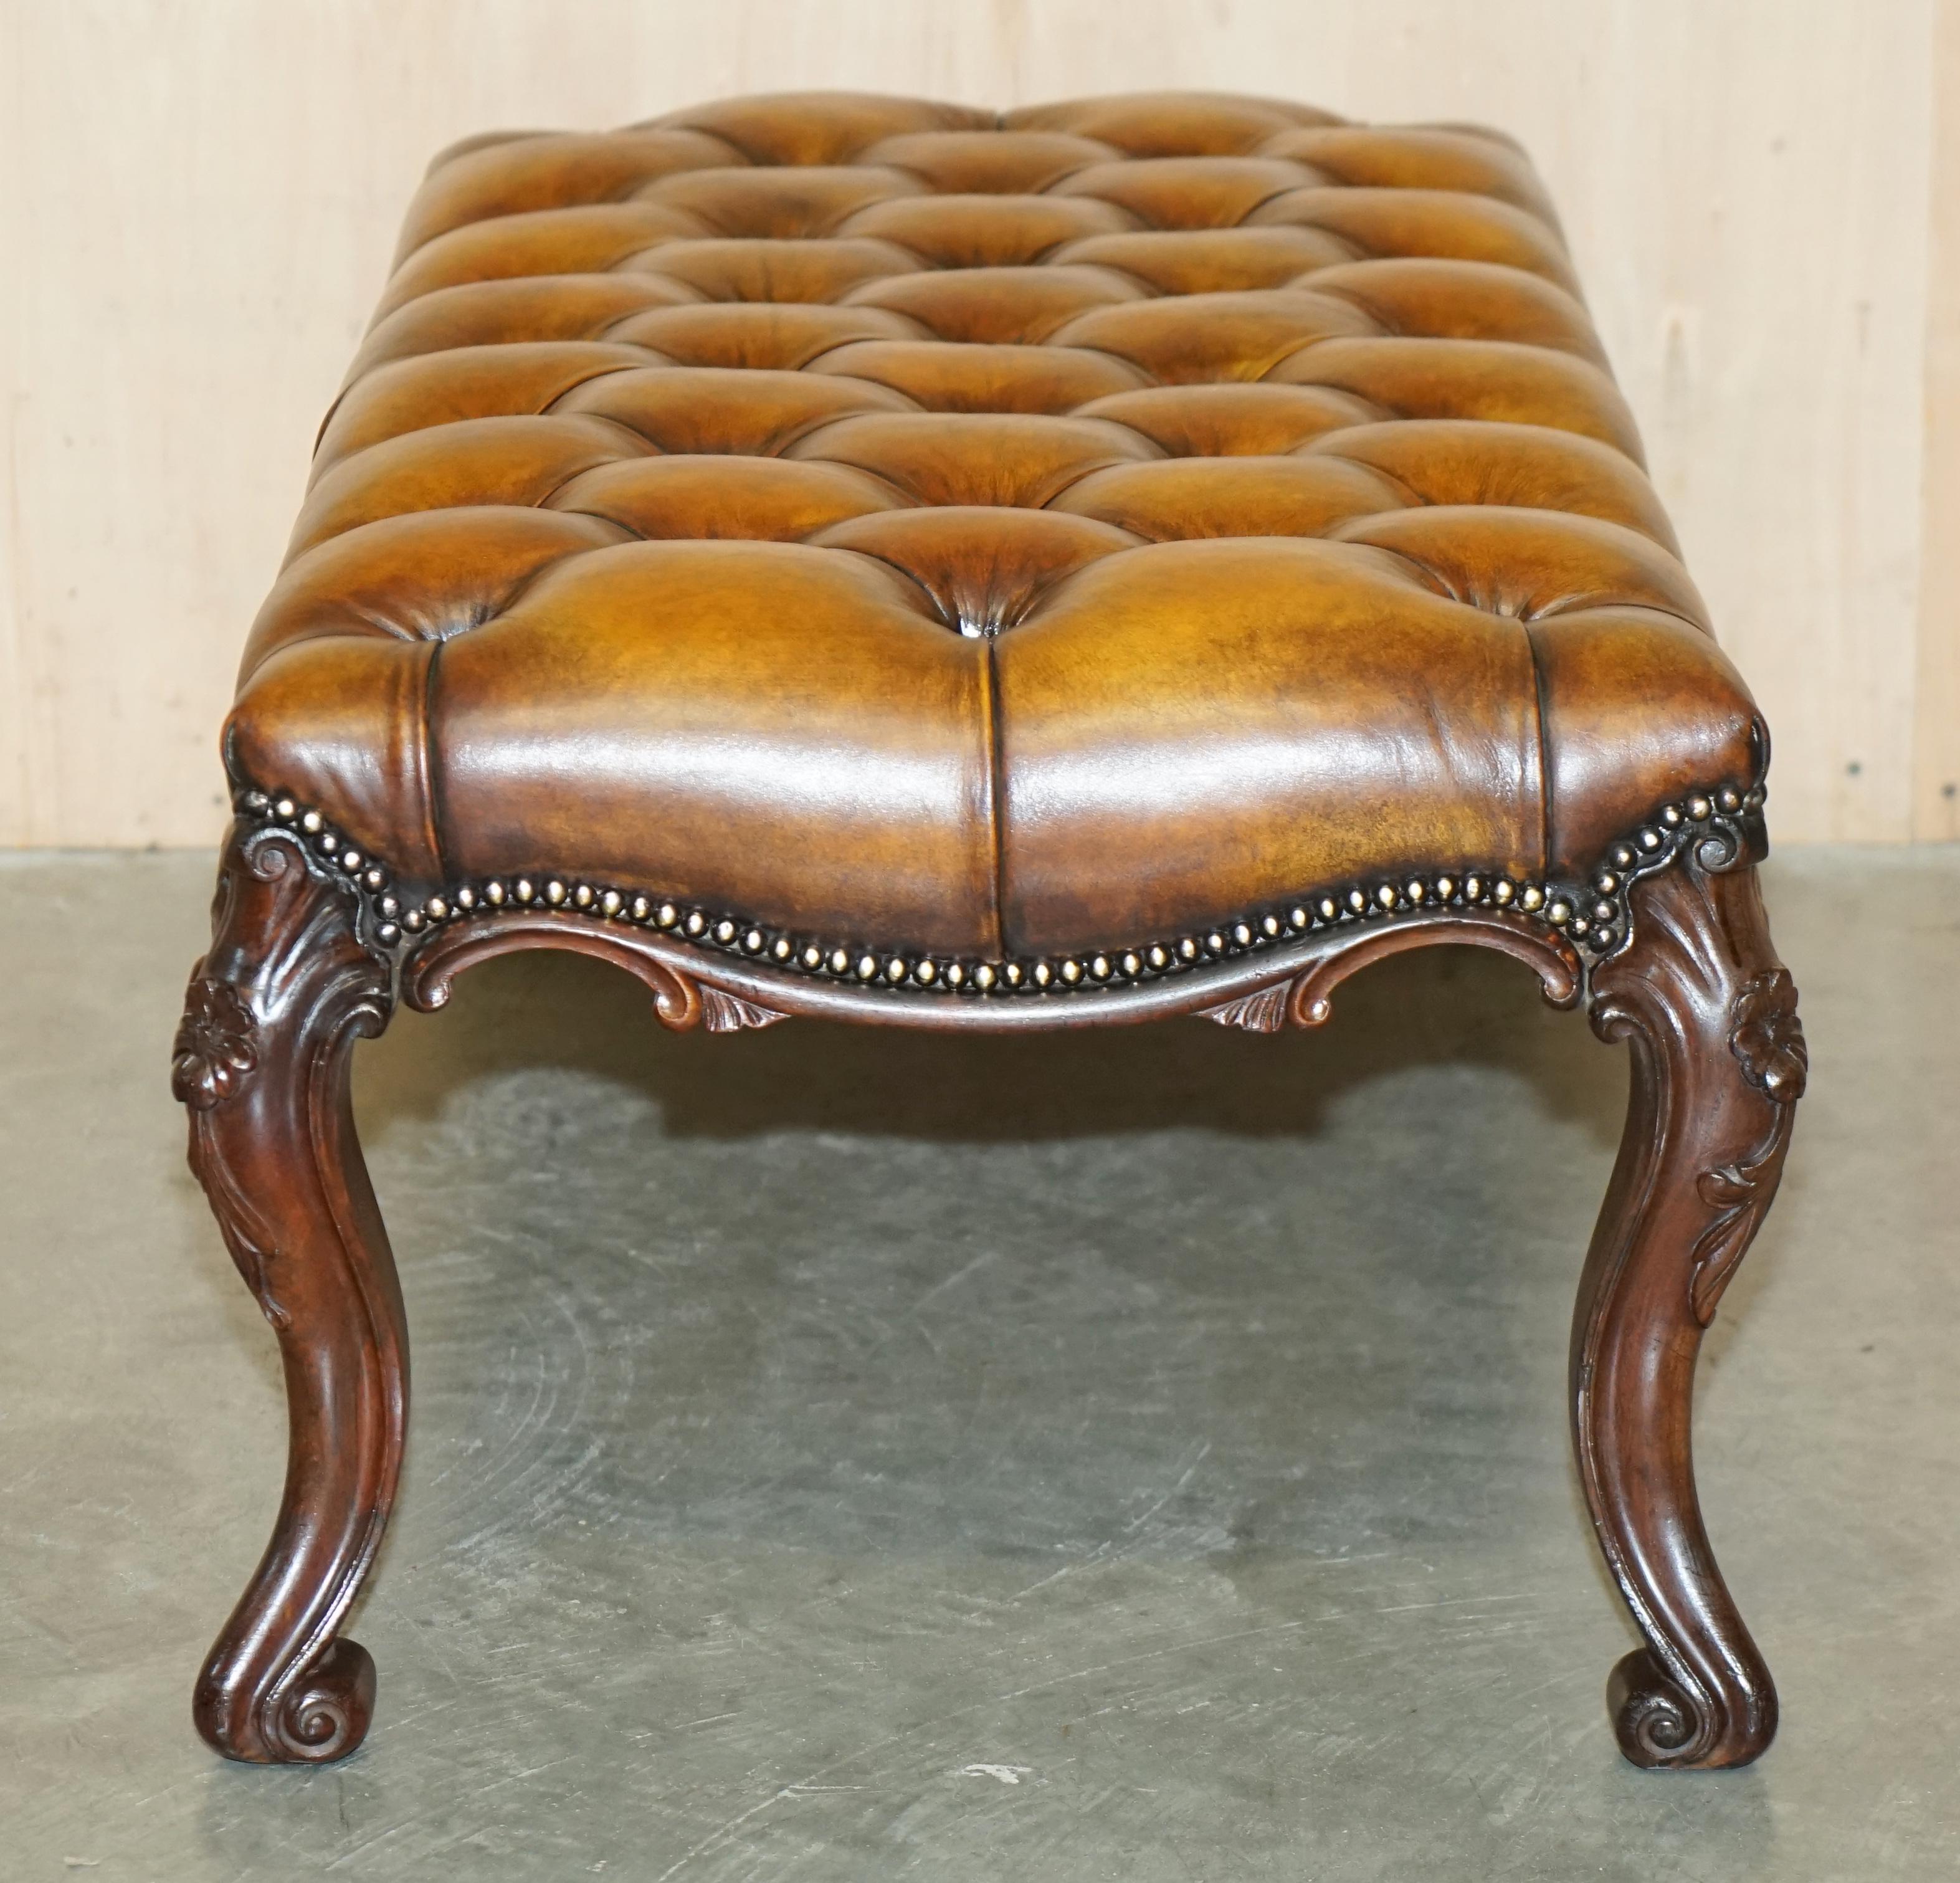 FINE ANTIQUE ViCTORIAN HARDWOOD SHOW FRAME CHESTERFIELD BROWN LEATHER FOOTSTOOL 12